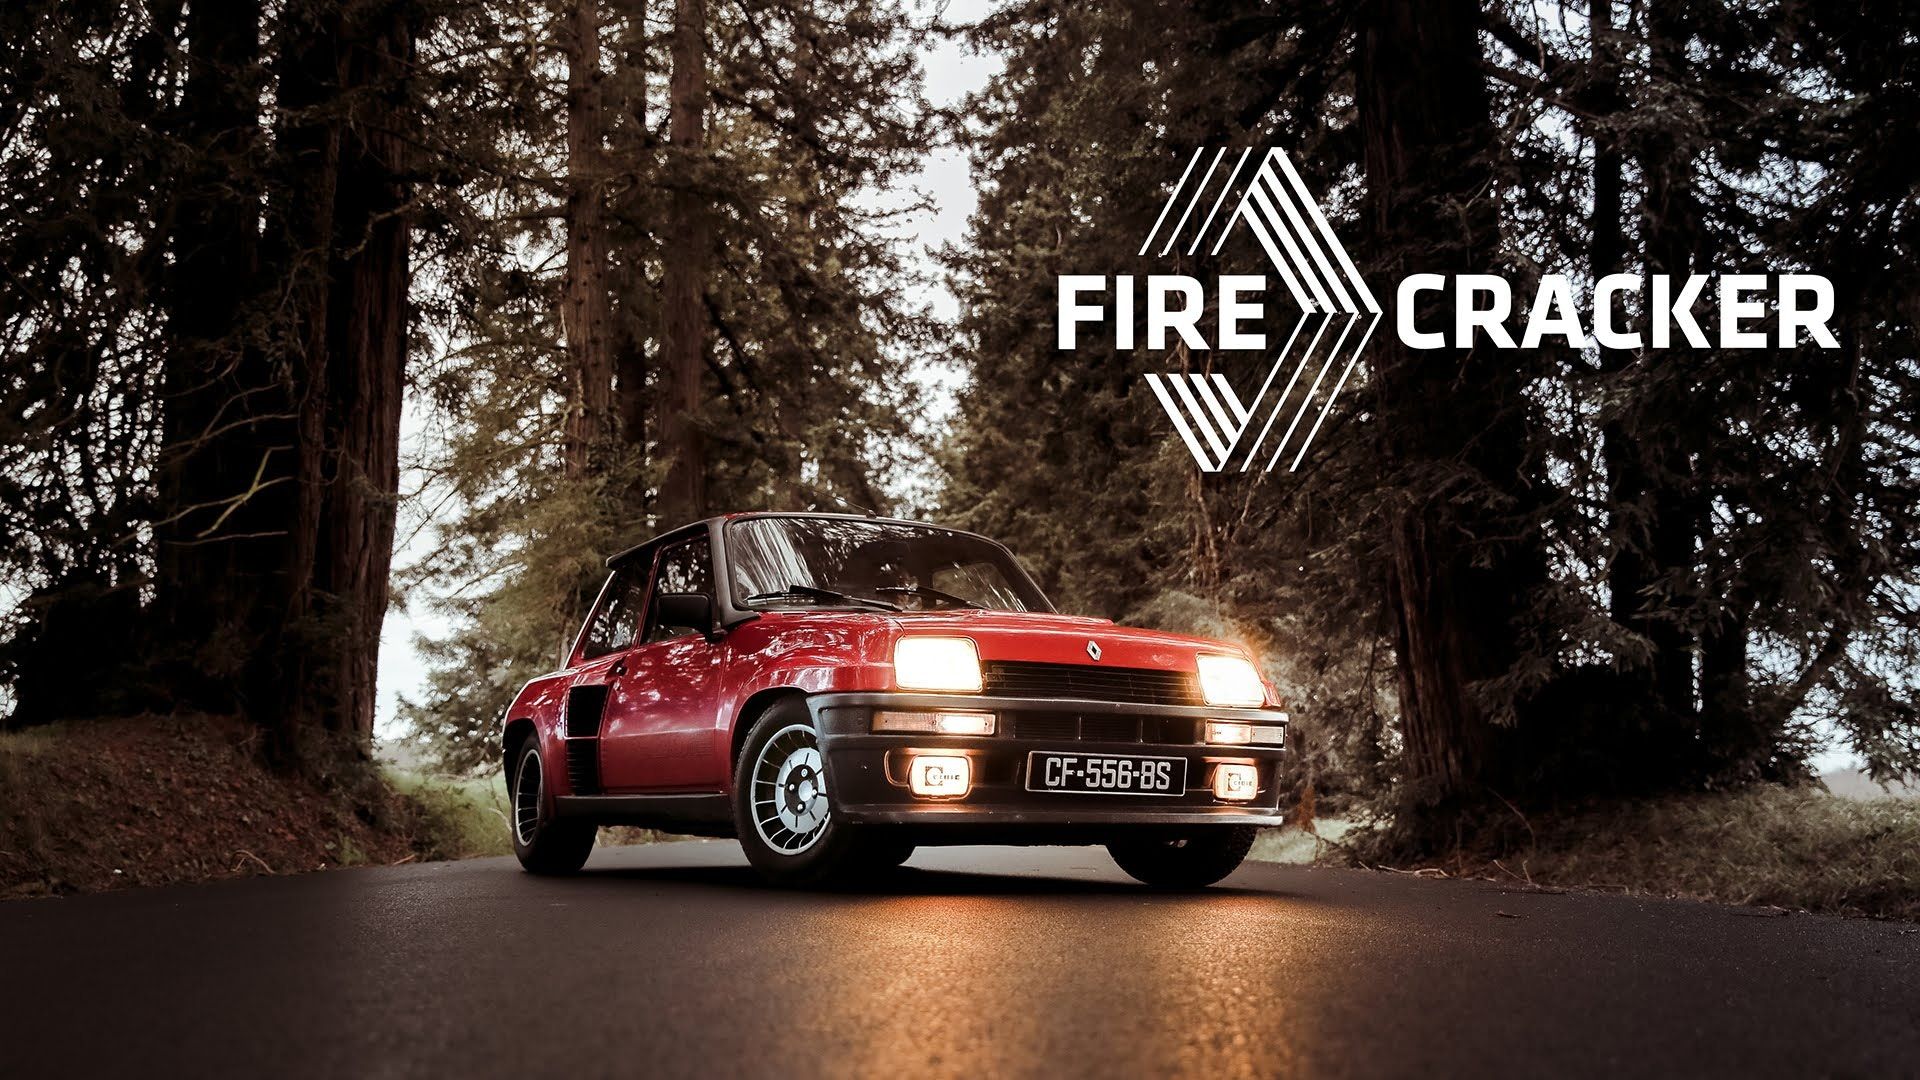 The Renault 5 Turbo 2 Is a Pure Firecracker